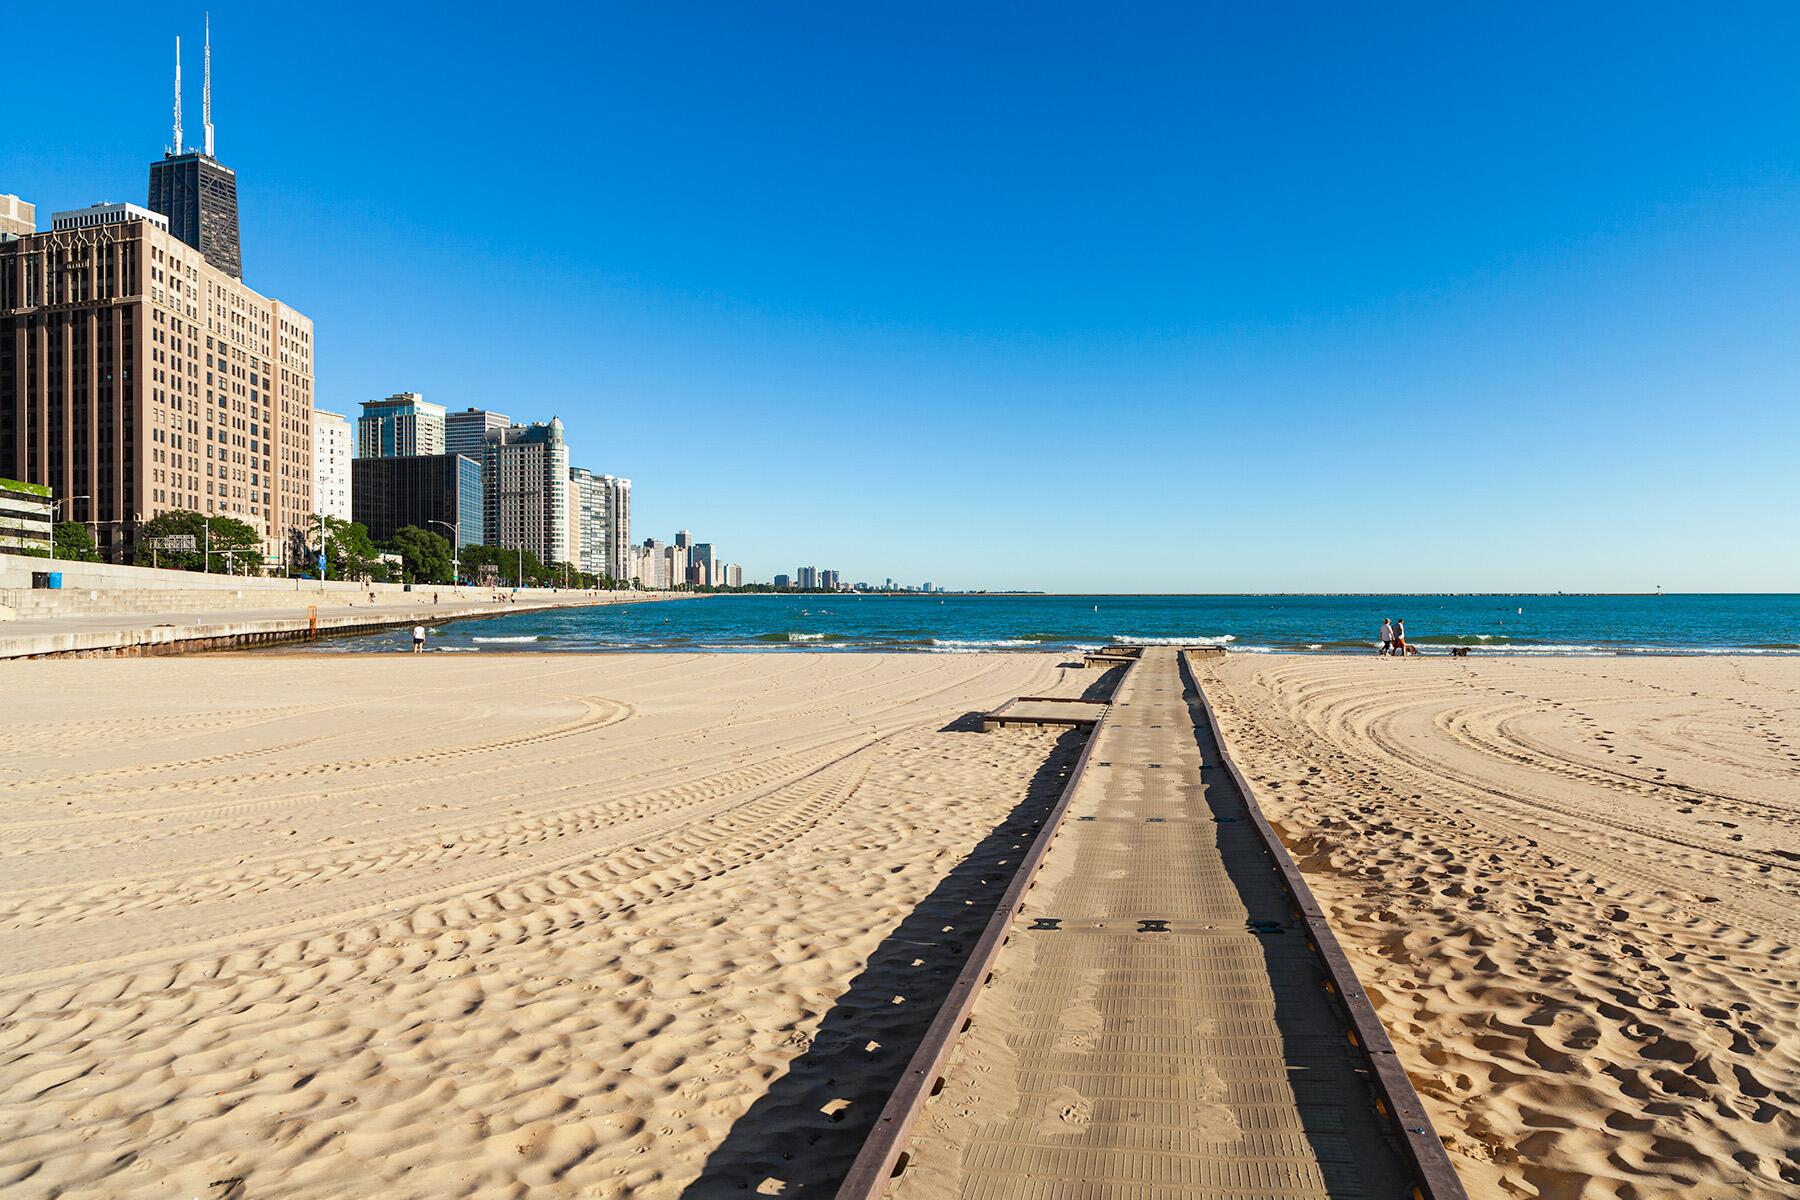 <a href='https://www.fodors.com/world/north-america/usa/illinois/chicago/experiences/news/photos/the-best-ways-to-enjoy-chicagos-lake-michigan-lakefront#'>From &quot;Here's How to Best Experience Chicago's Lakefront: Beaches&quot;</a>